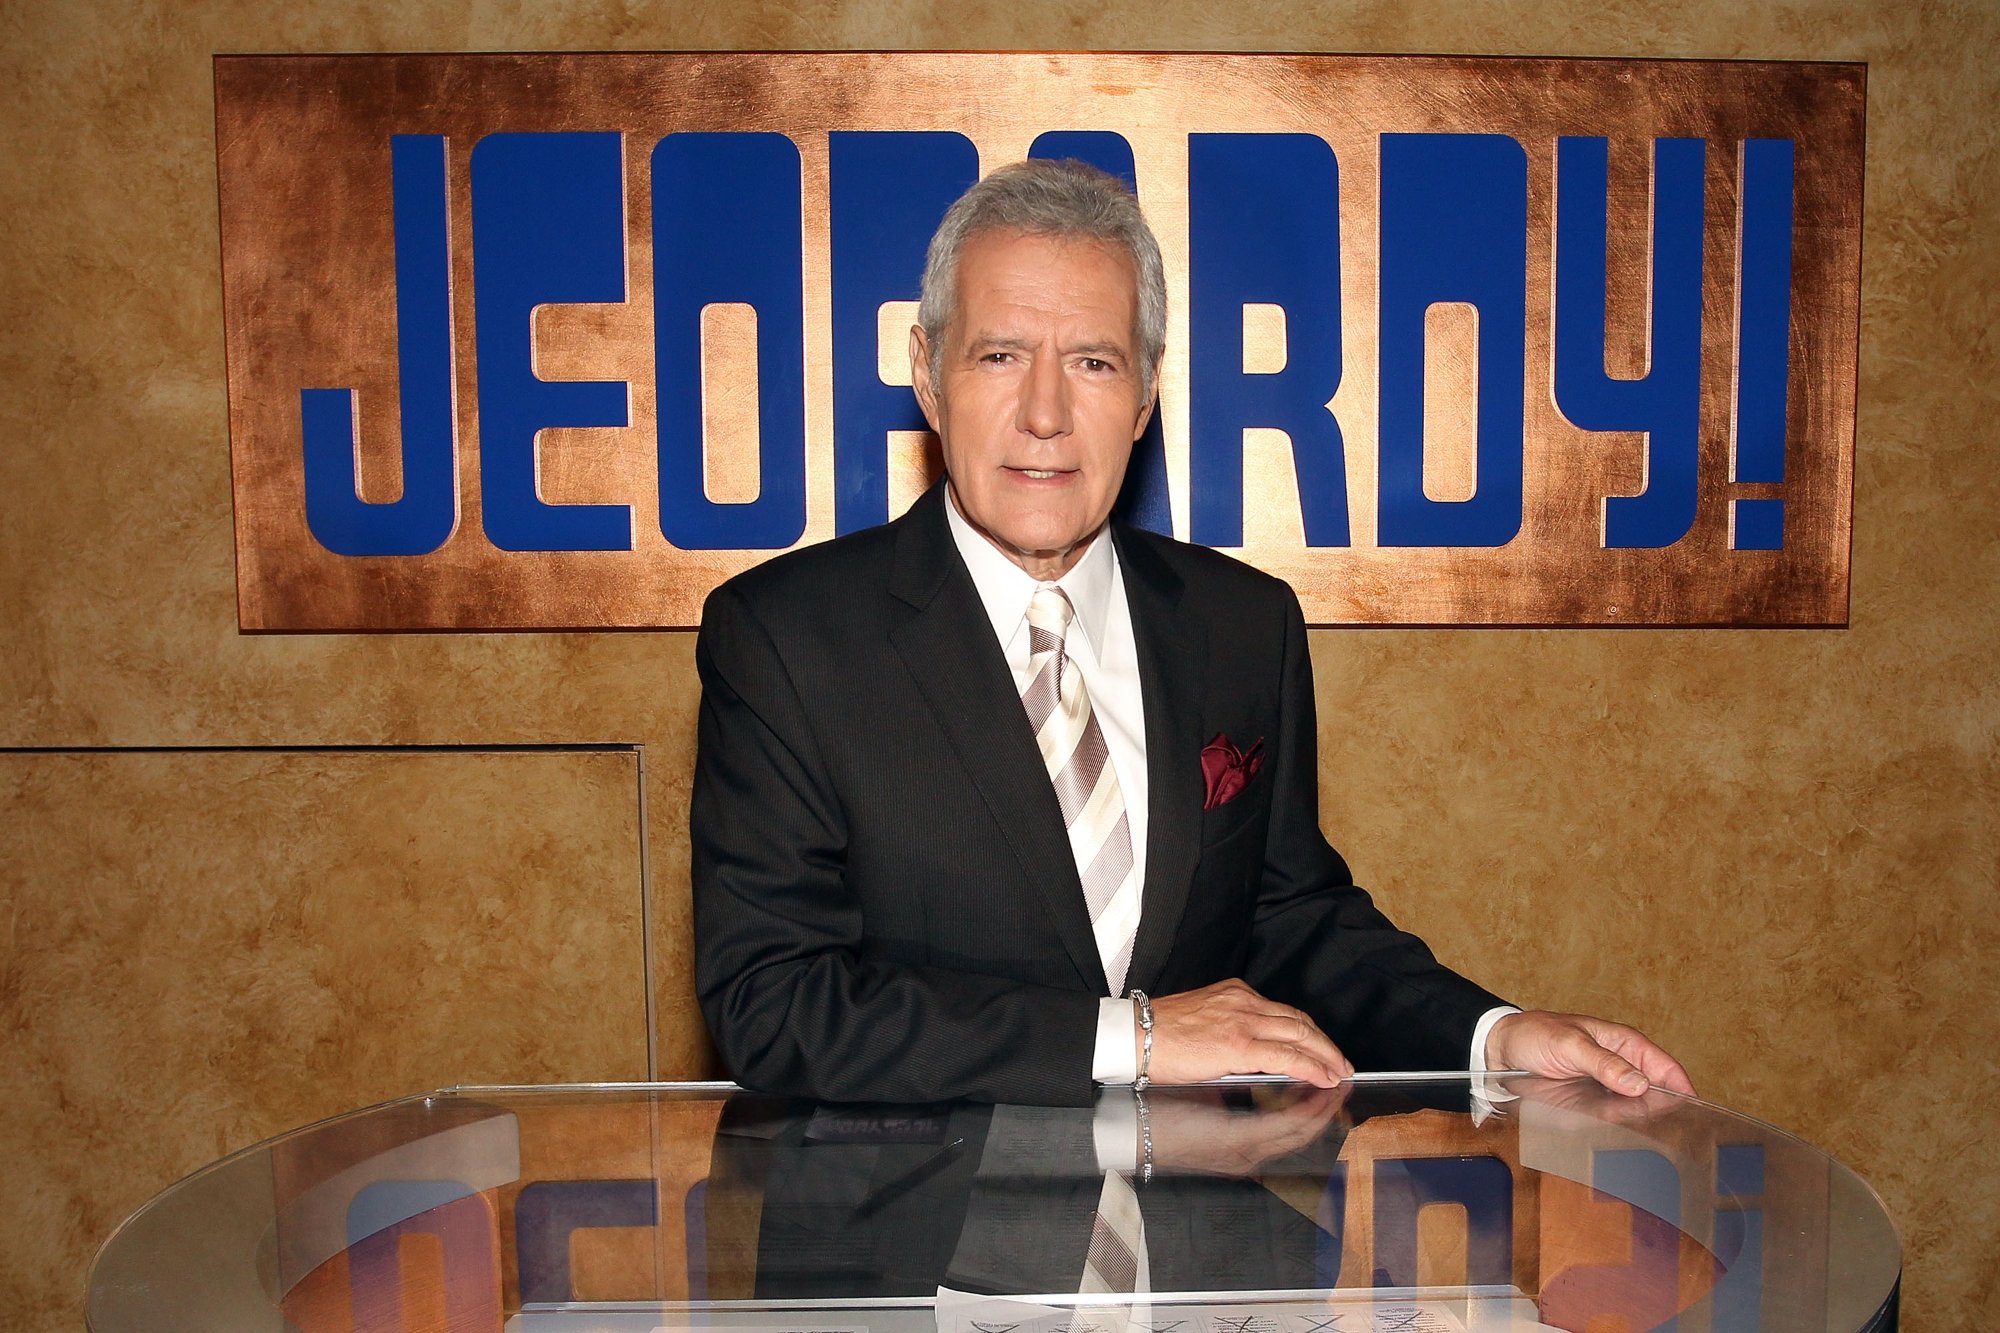 'Jeopardy!' host Alex Trebek posing against a table wearing a suit with the show's logo behind him